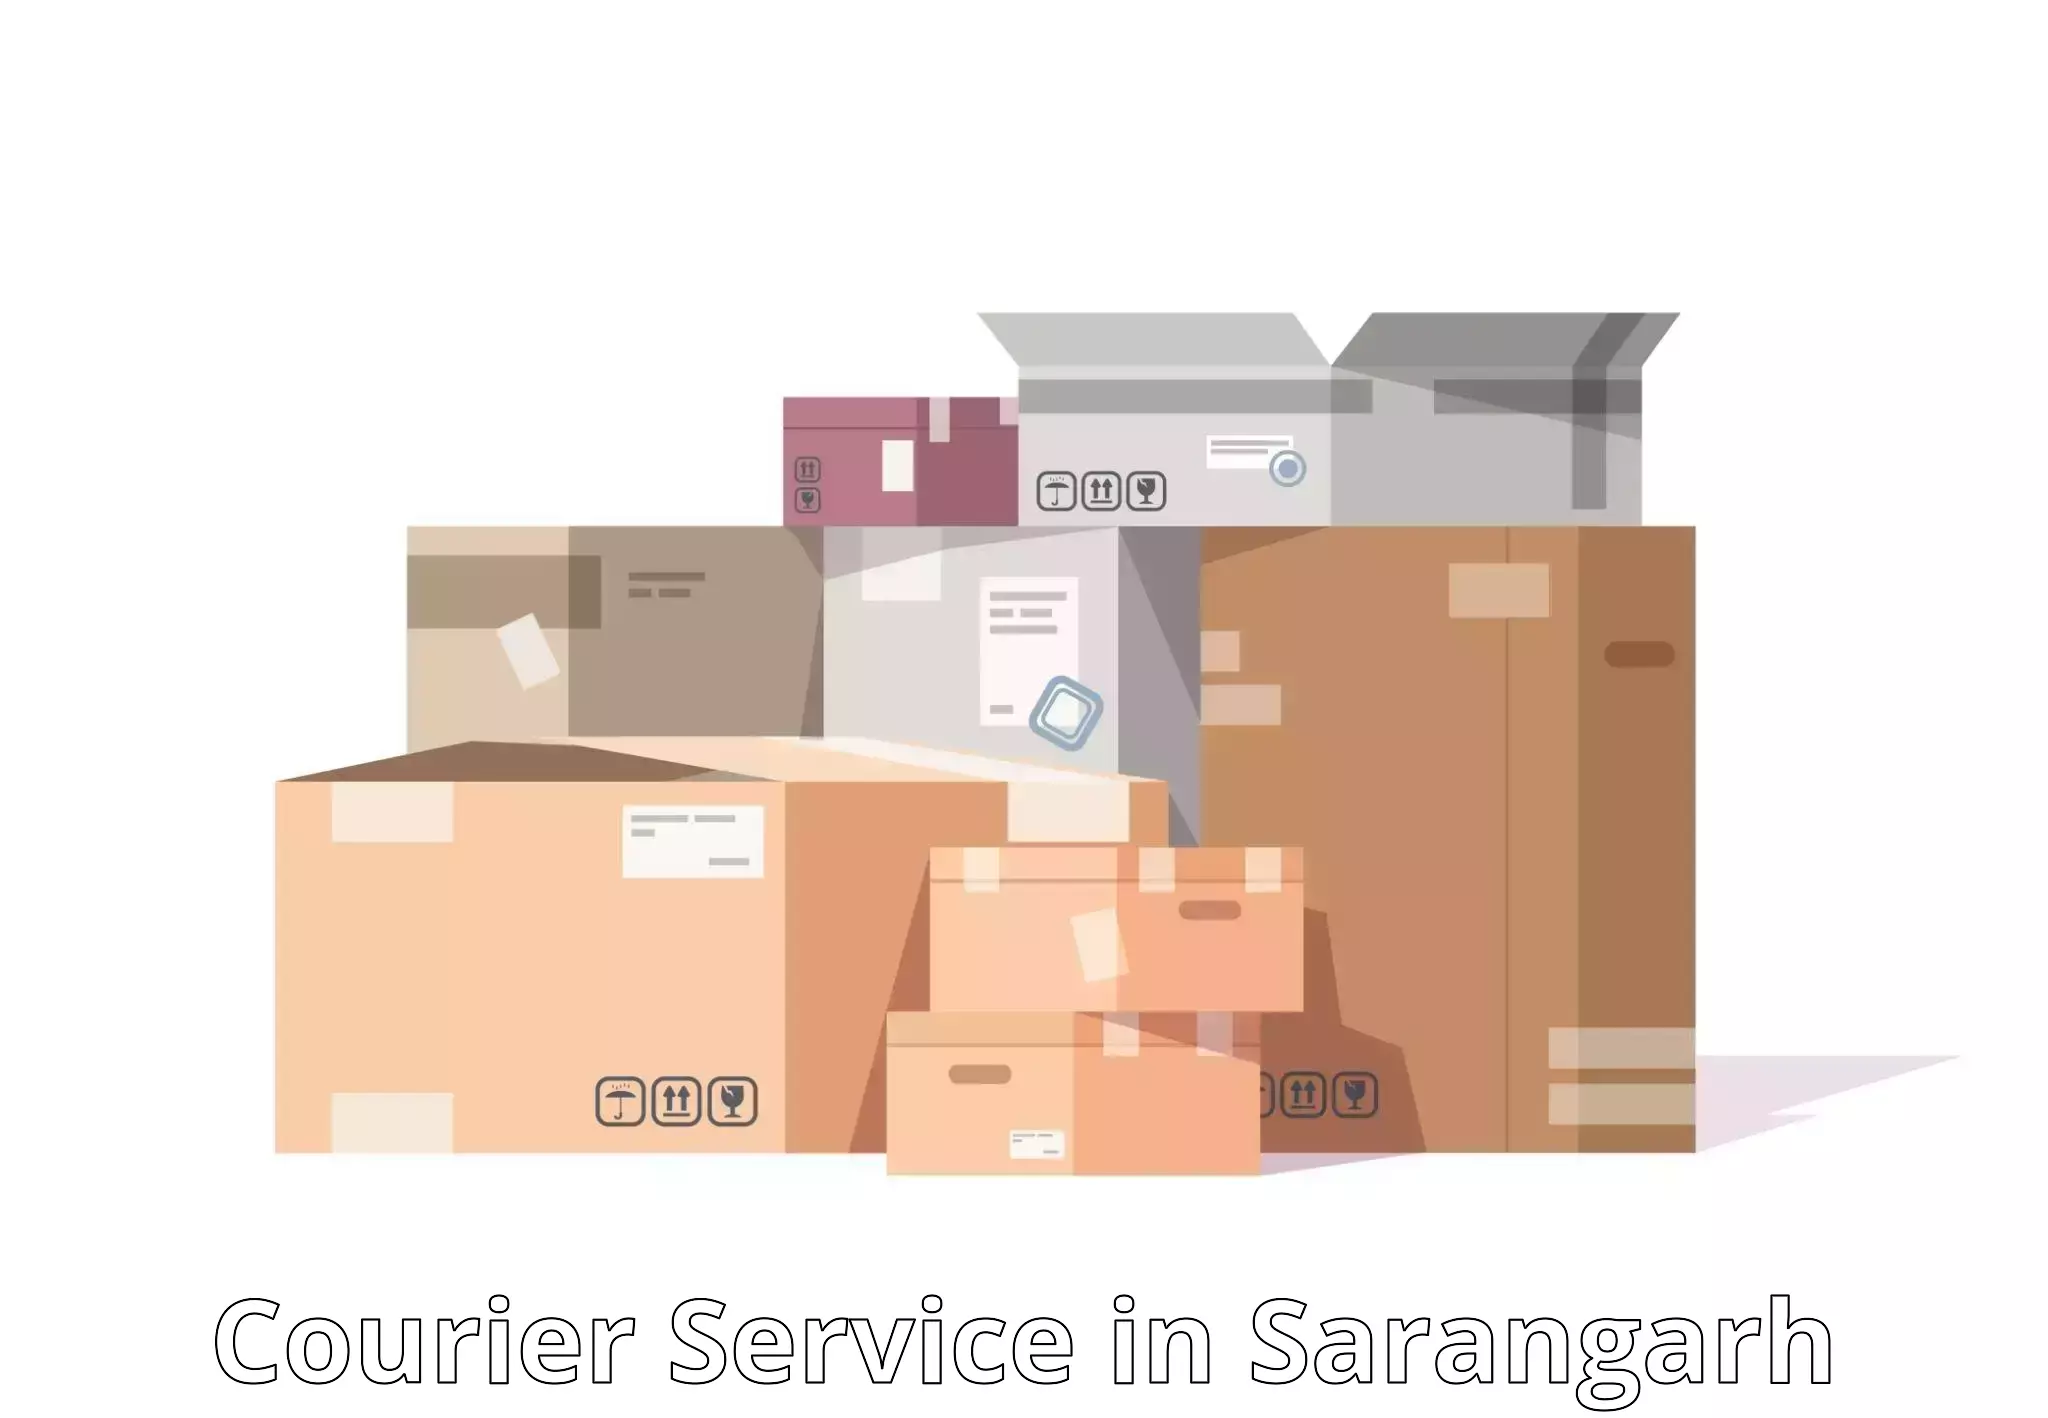 Fast-track shipping solutions in Sarangarh